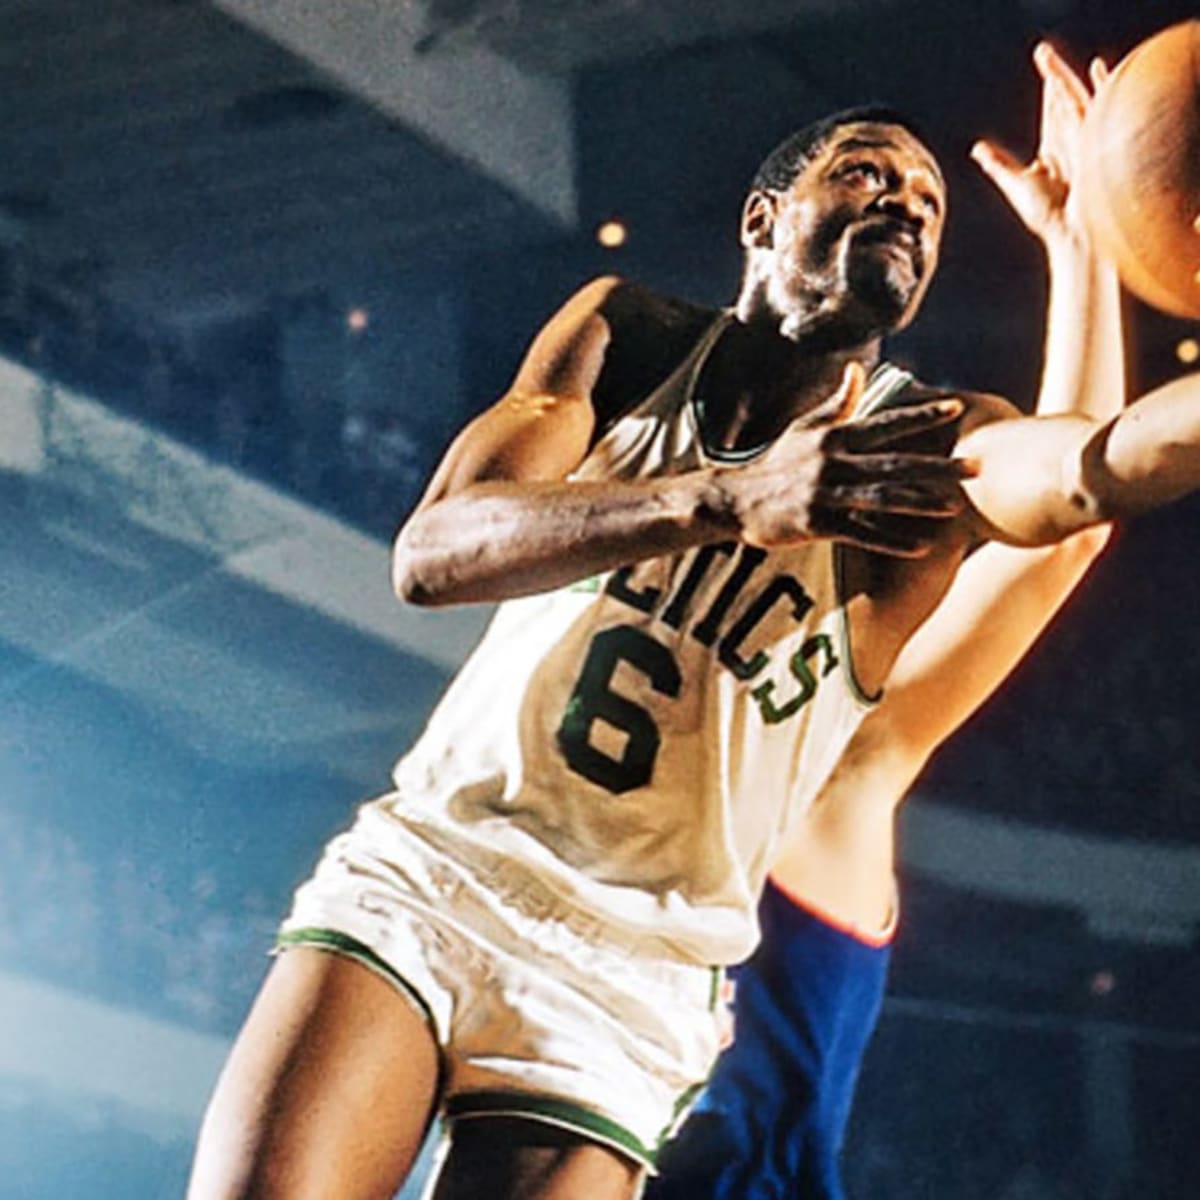 Celtics to debut beautiful jersey in honor of the late, great Bill Russell